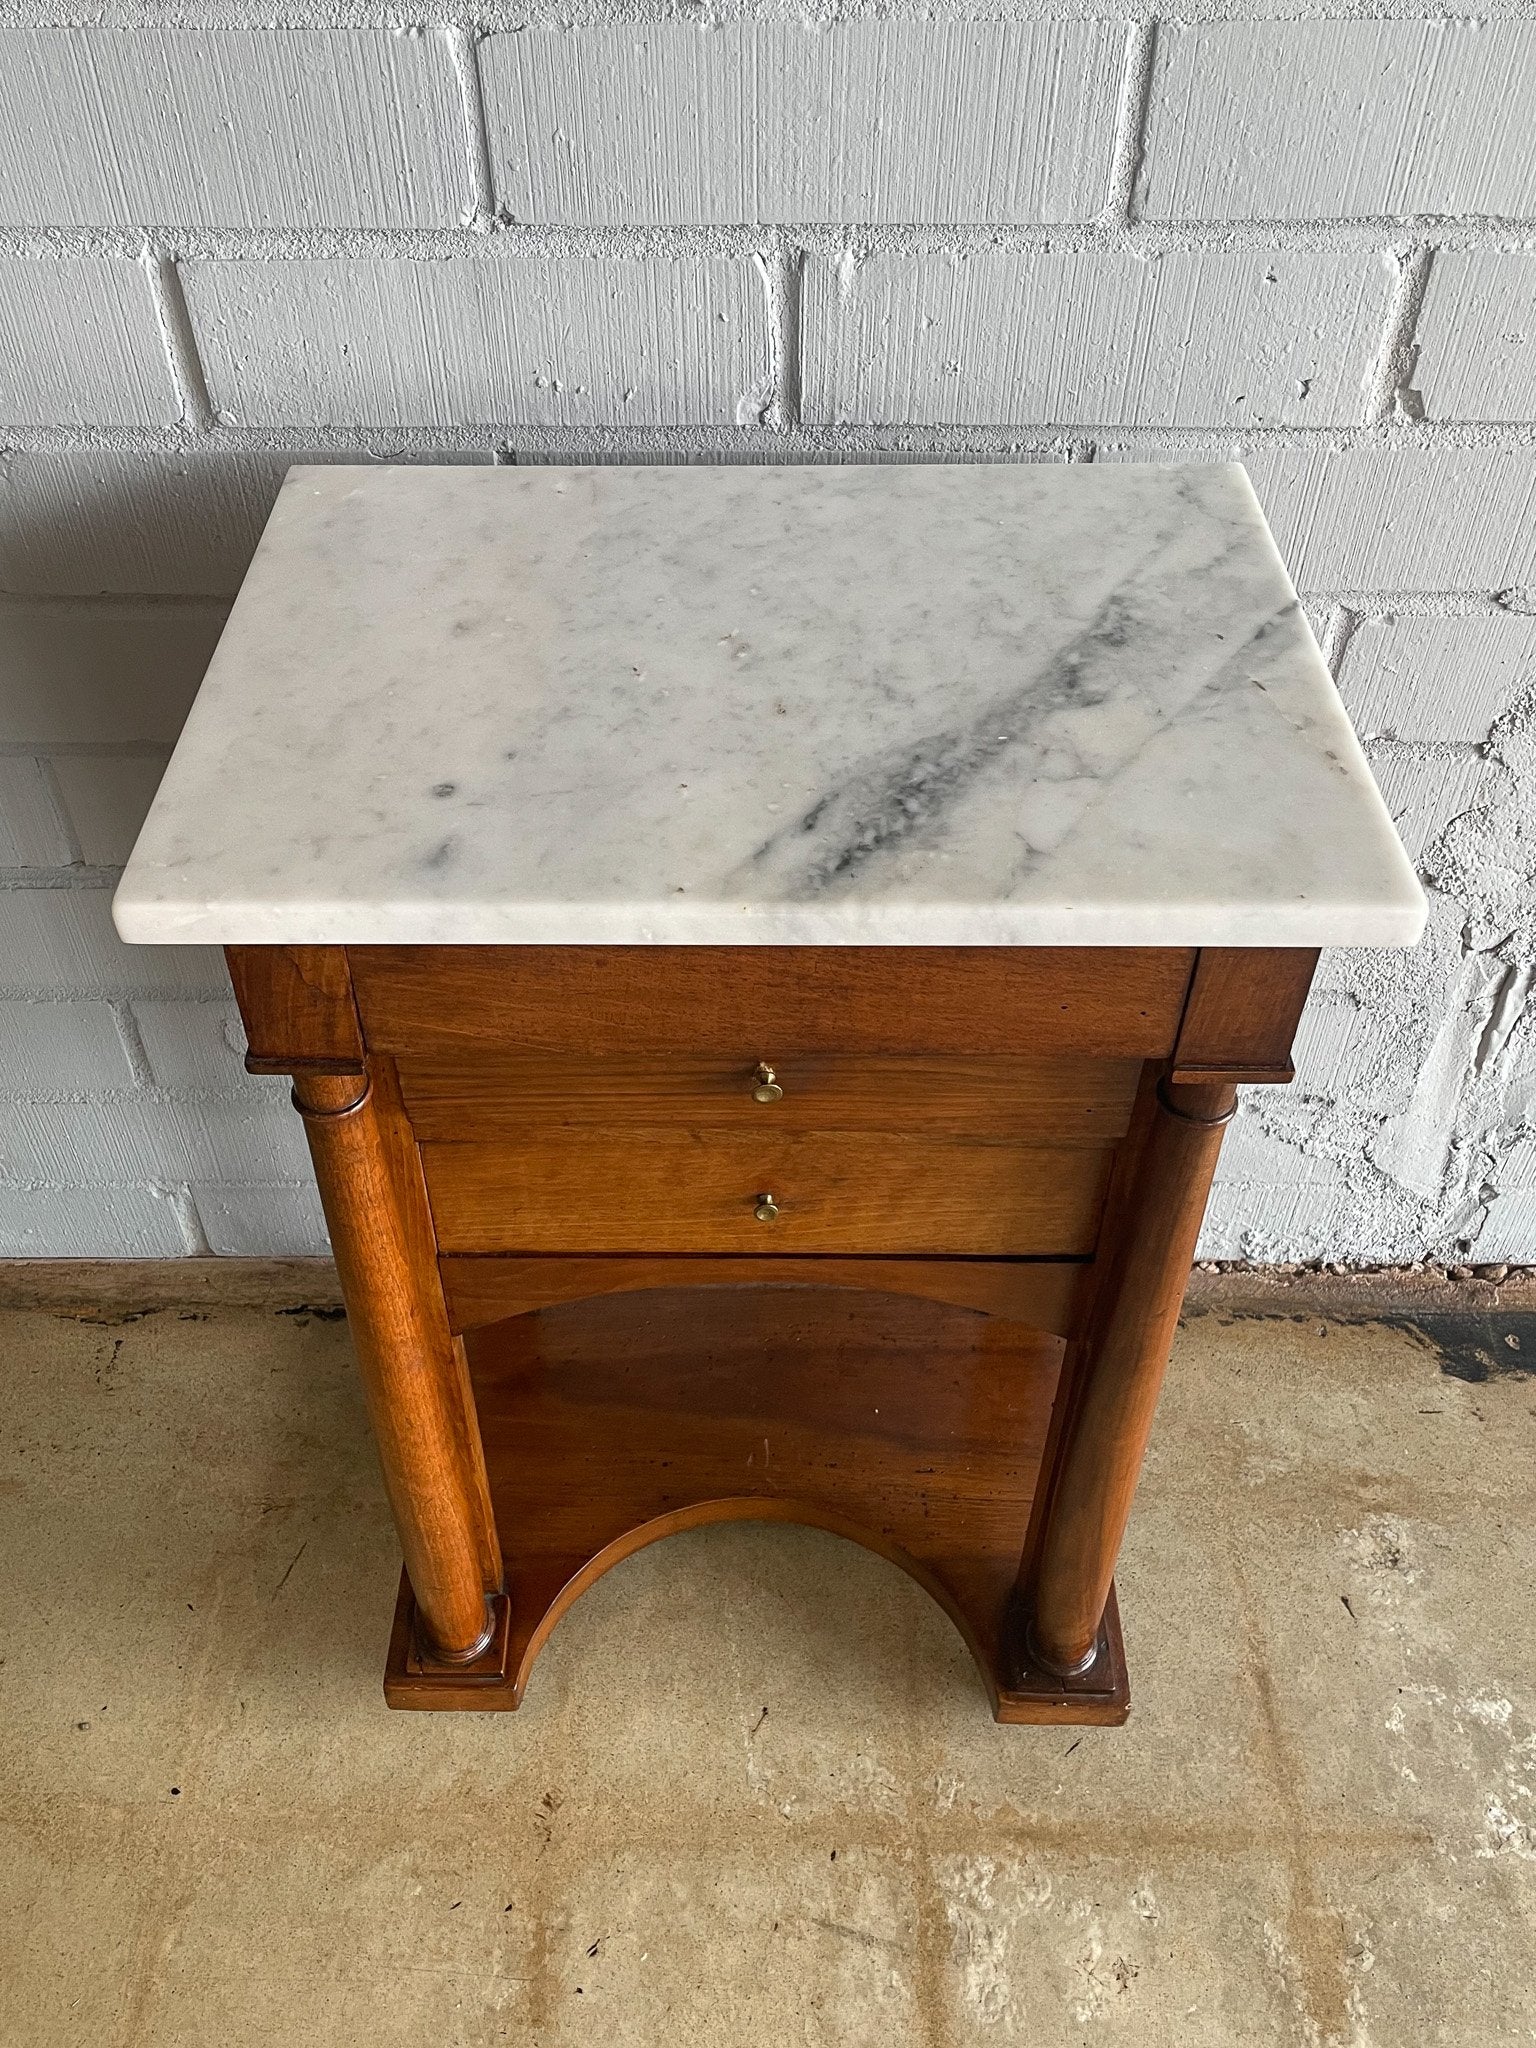 ANTIQUE SIDE TABLE WITH WHITE MARBLE TOP